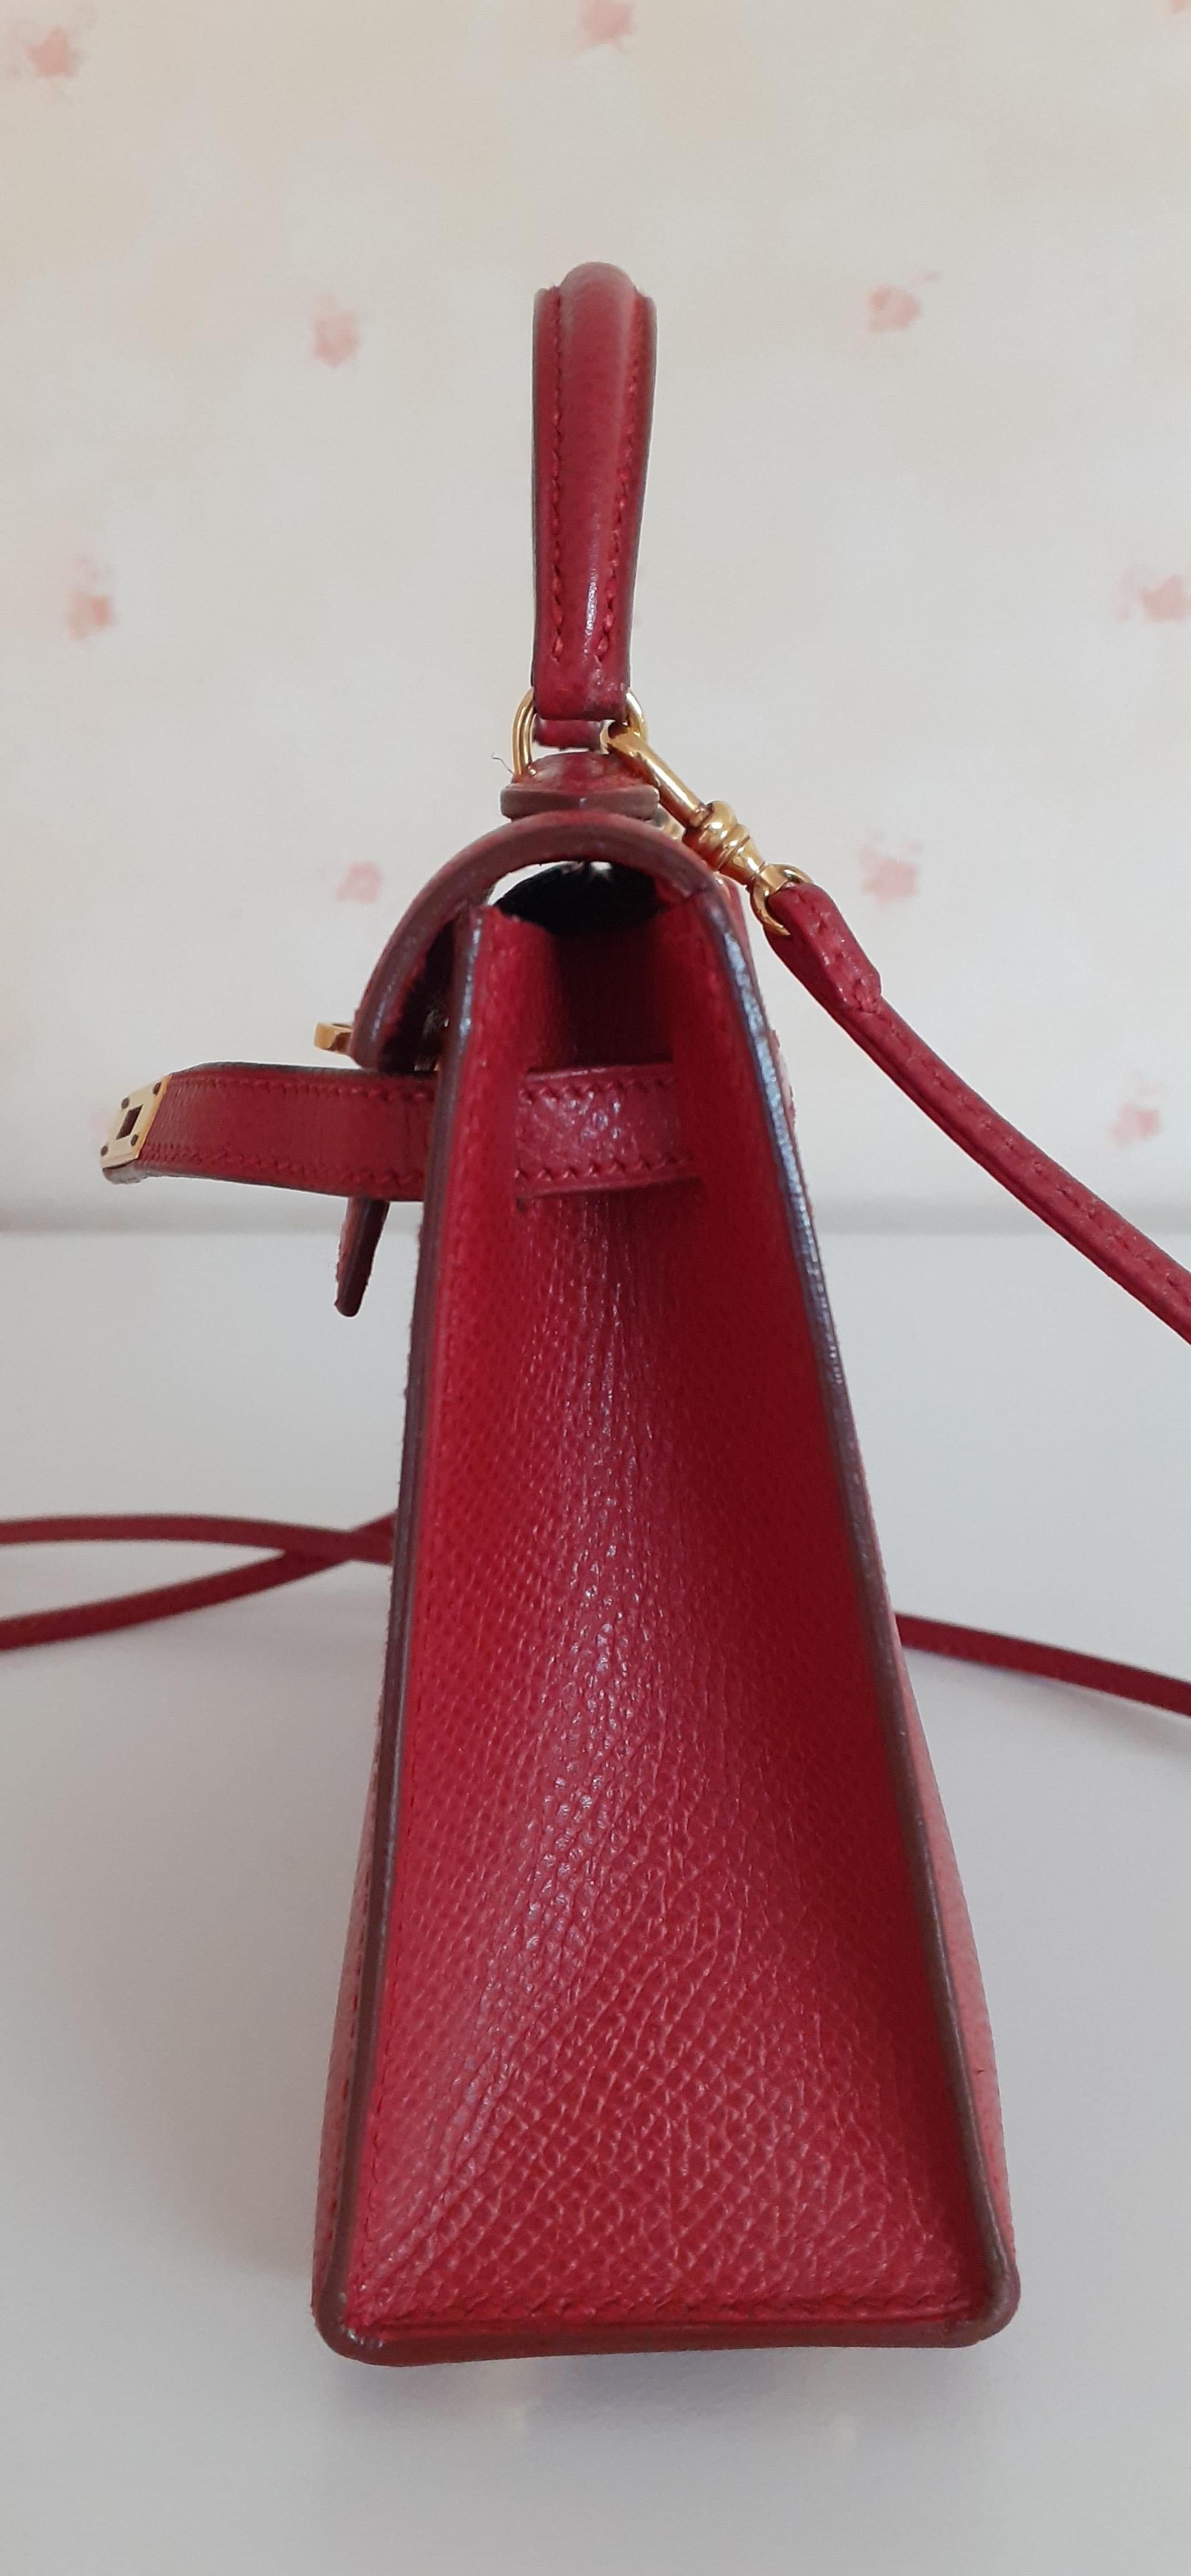 Exceptional Hermès Vintage Micro Kelly 15 cm Sellier Bag Red Leather Gold Hdw For Sale 2